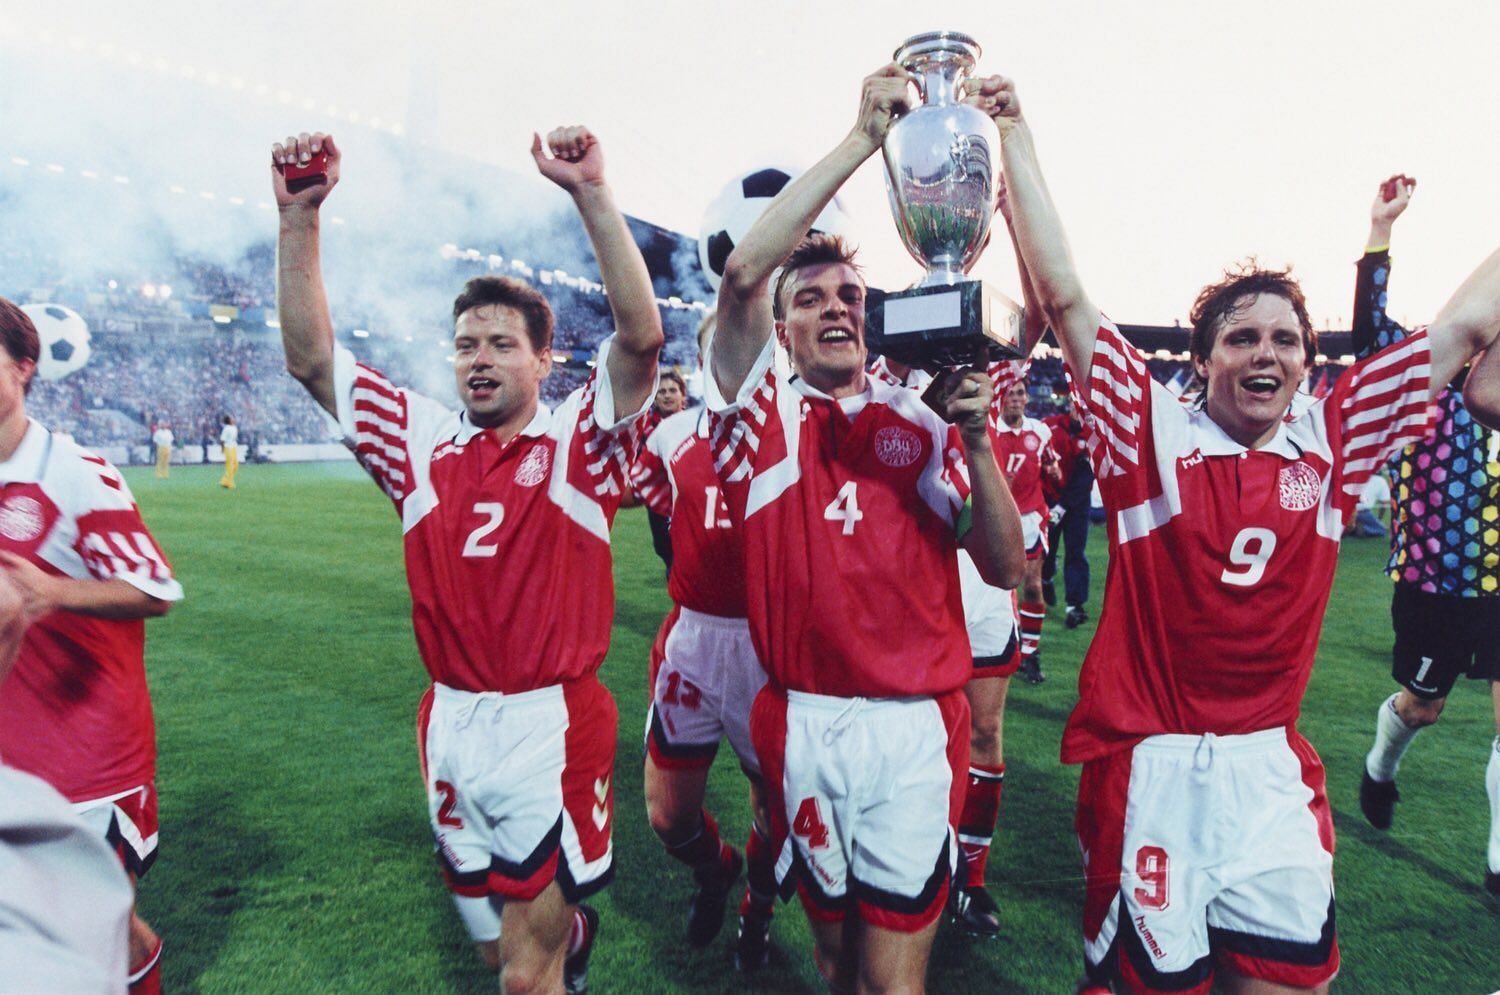 Denmark celebrating their miraculous victory which is another football record unlikely to be broken